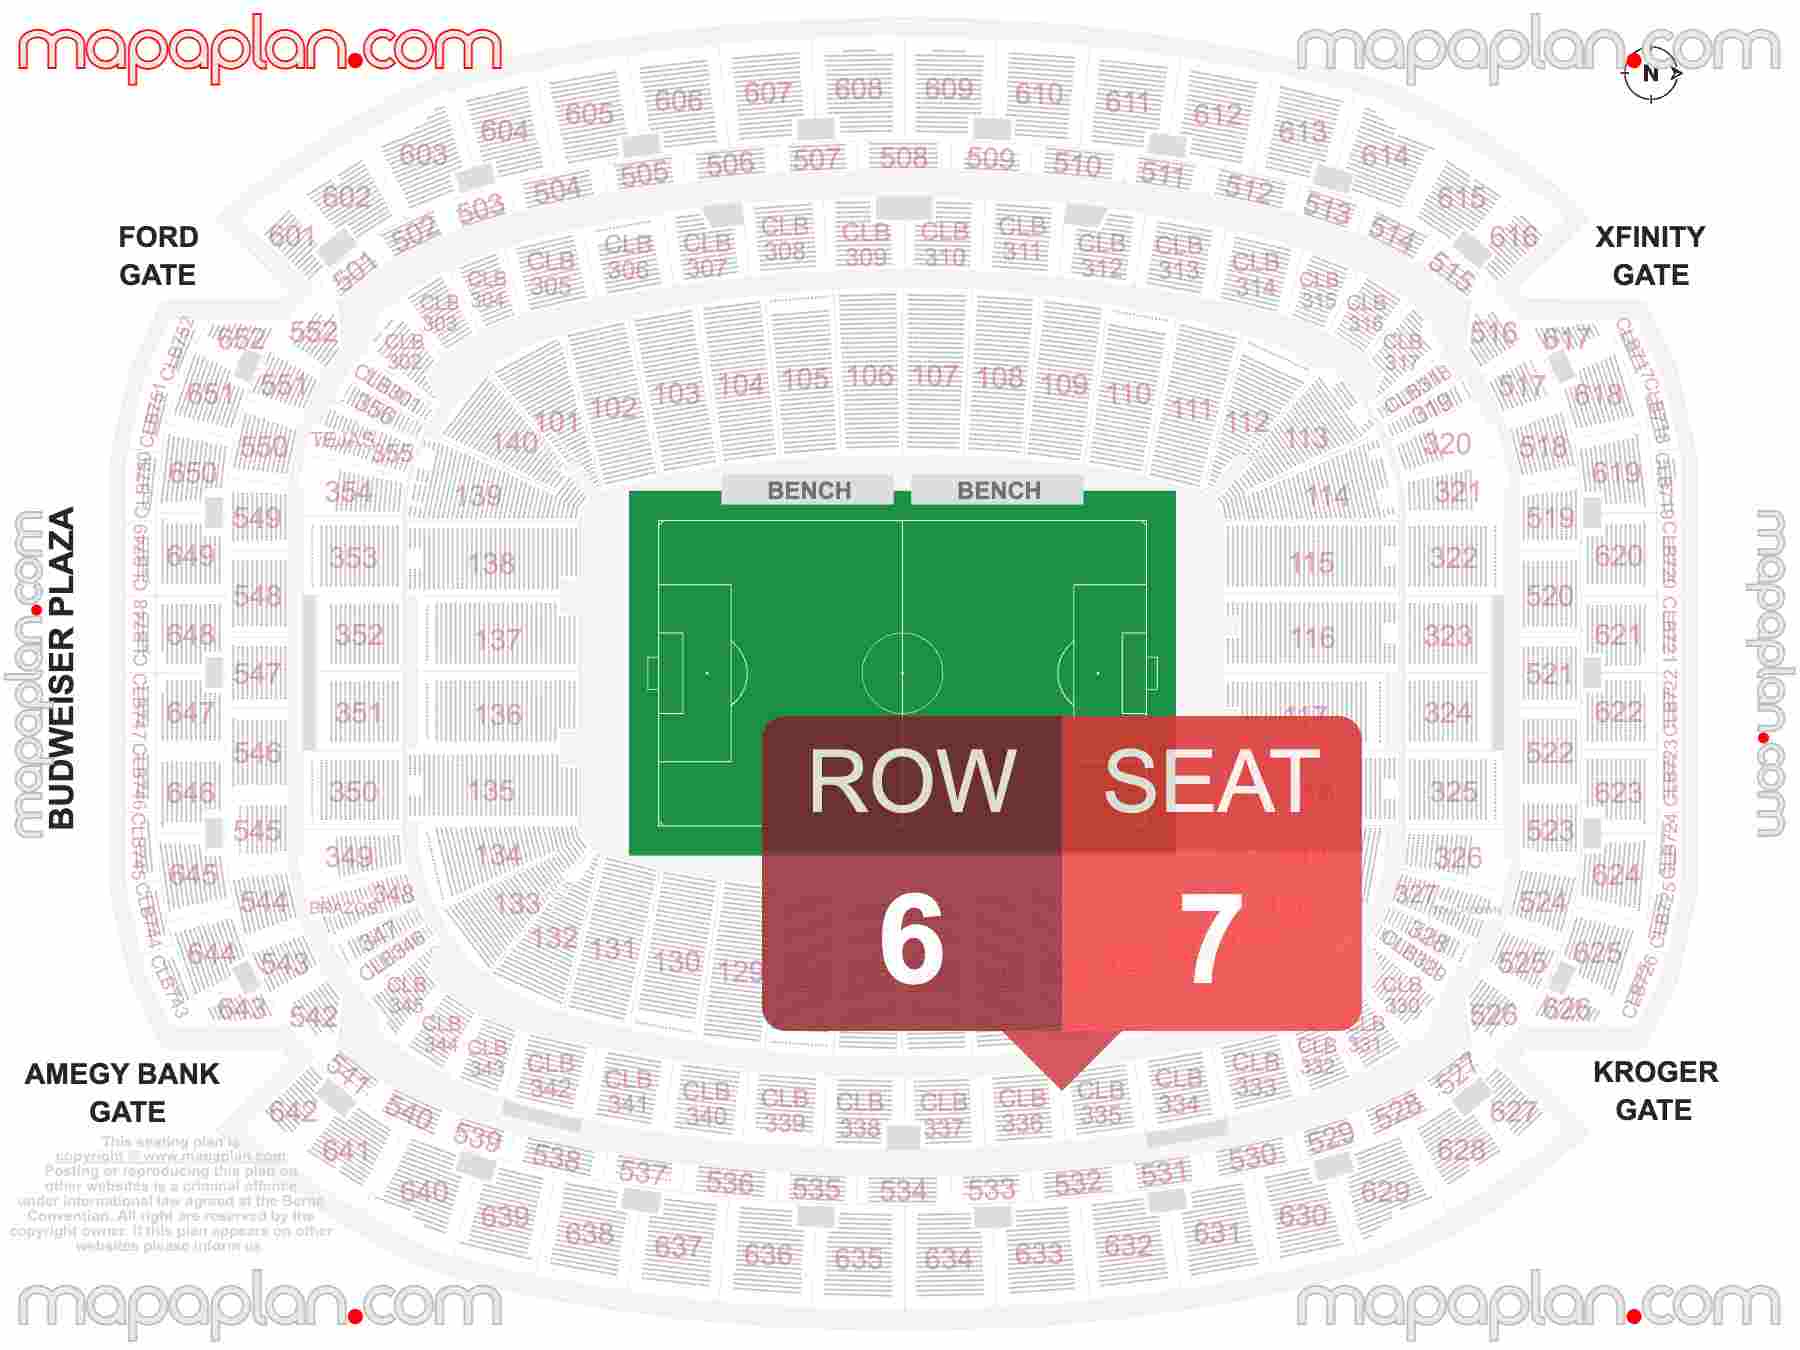 Houston NRG Stadium seating chart Soccer & Texans football detailed seat numbers and row numbering chart with interactive map plan layout